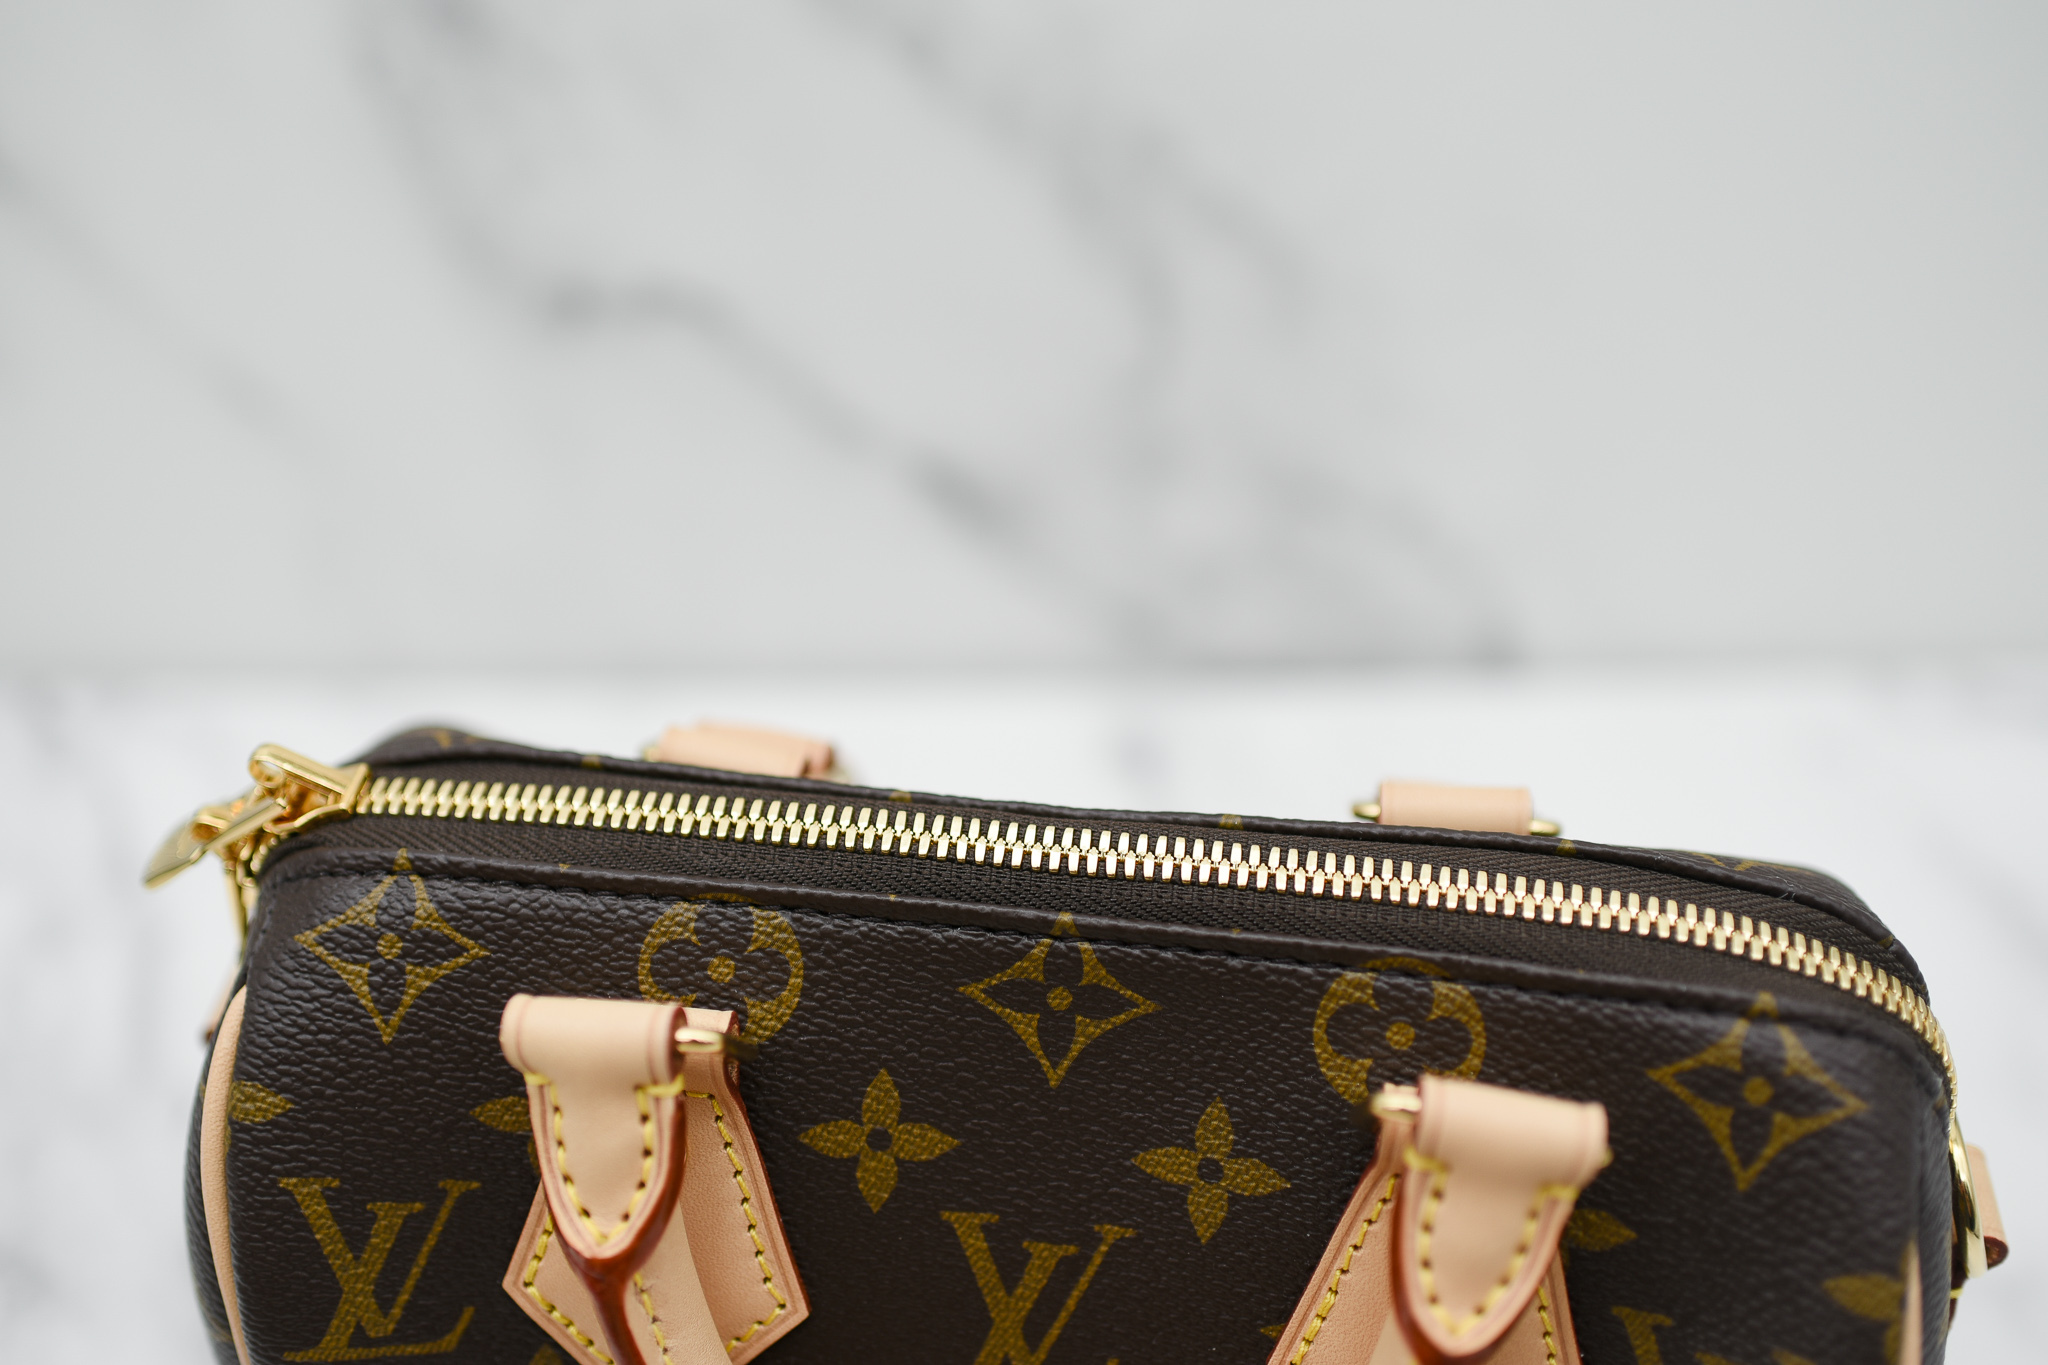 Louis Vuitton Speedy 20 St MNG Noir Limited Edition, New in Box